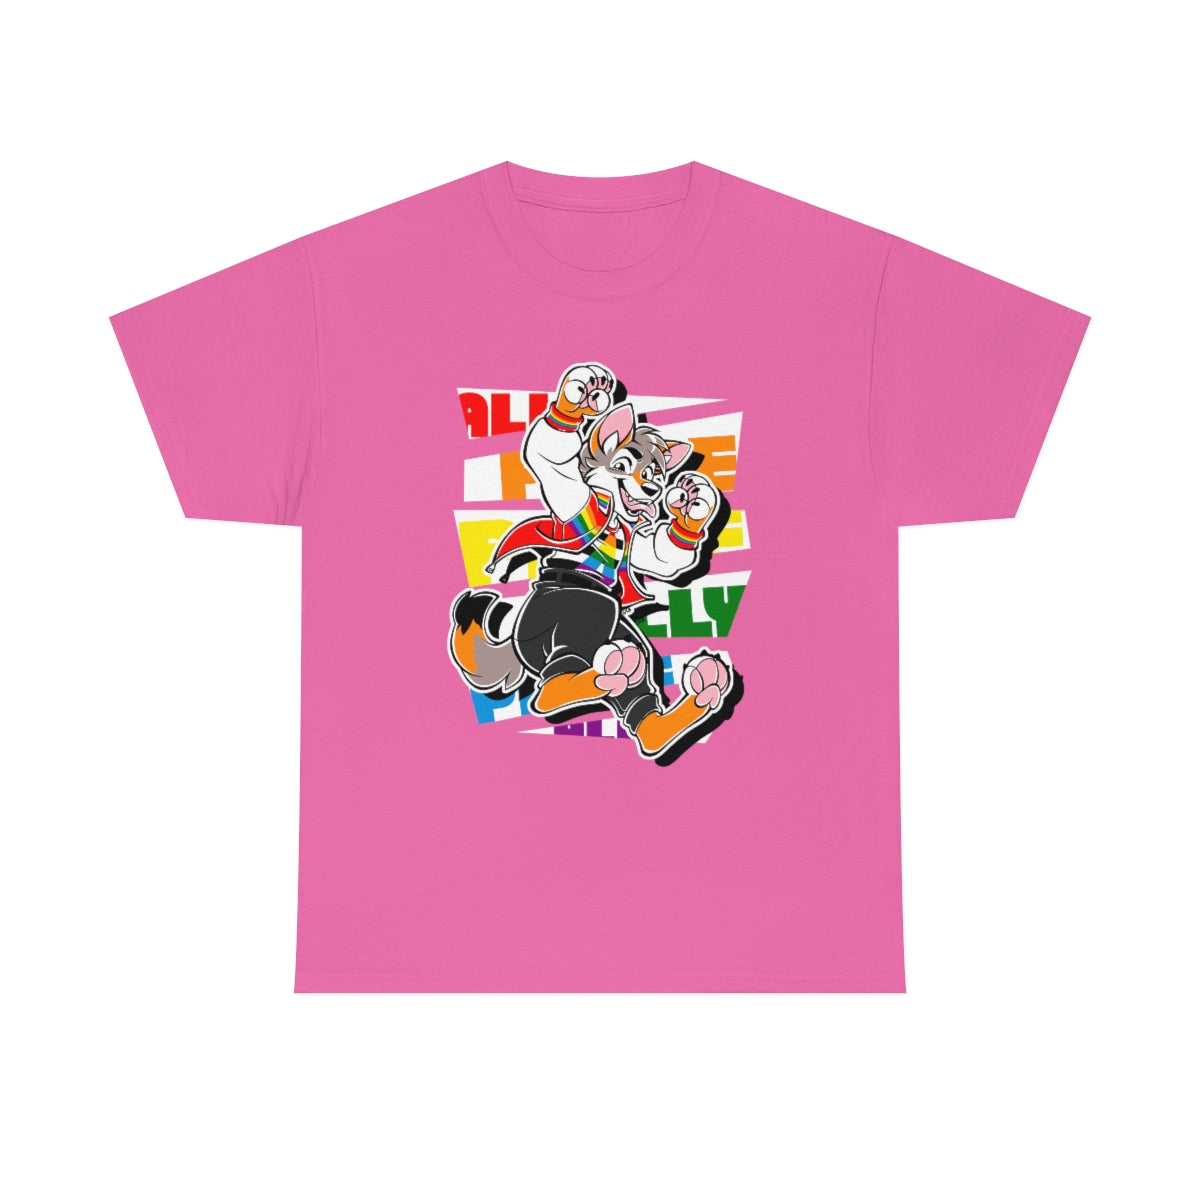 Ally Pride Marcus Wolf - T-Shirt T-Shirt Artworktee Pink S 